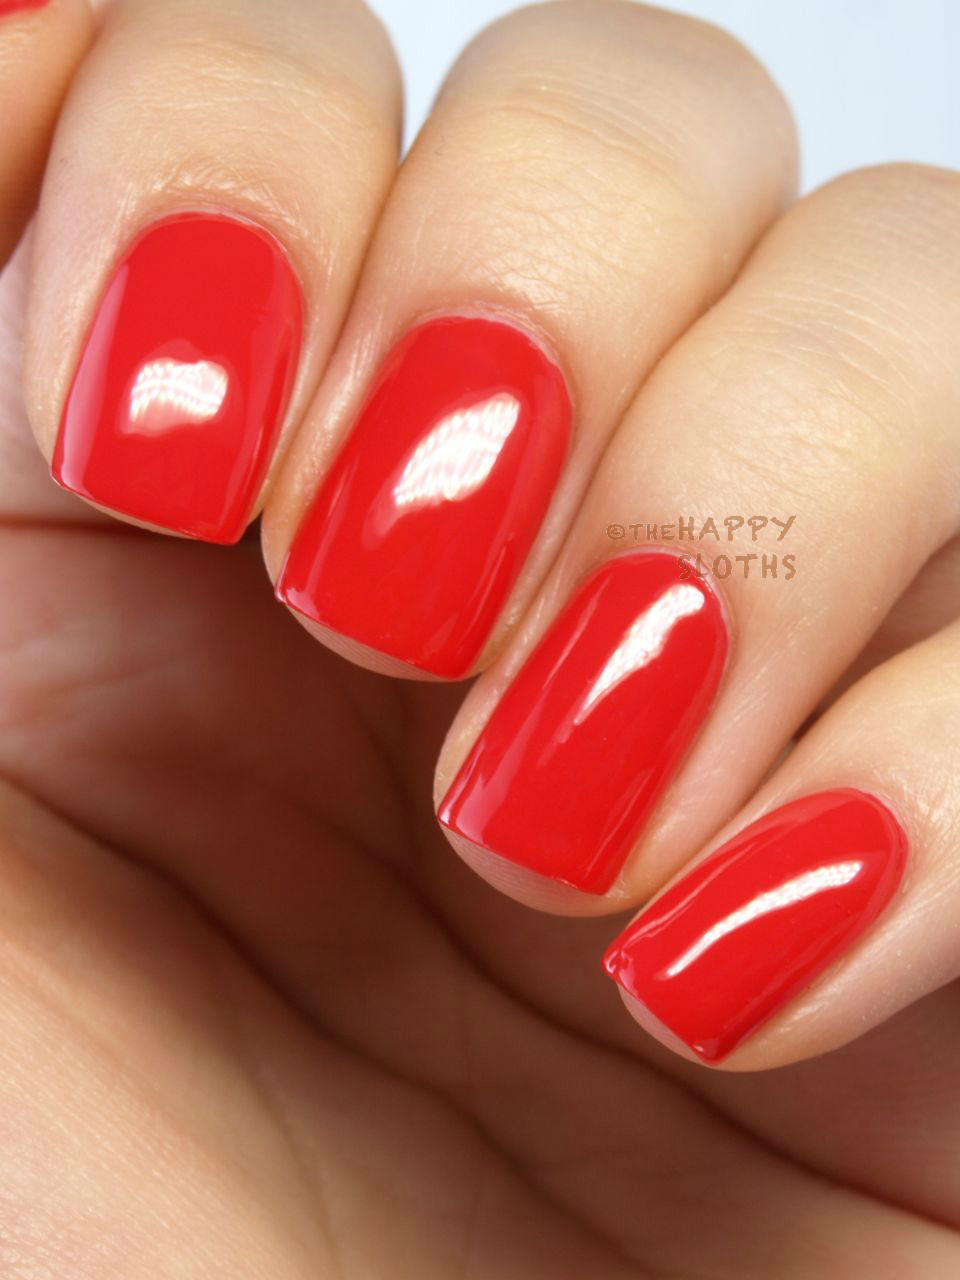 L'Oreal Infallible 2-Step Nail Color: Review and Swatches